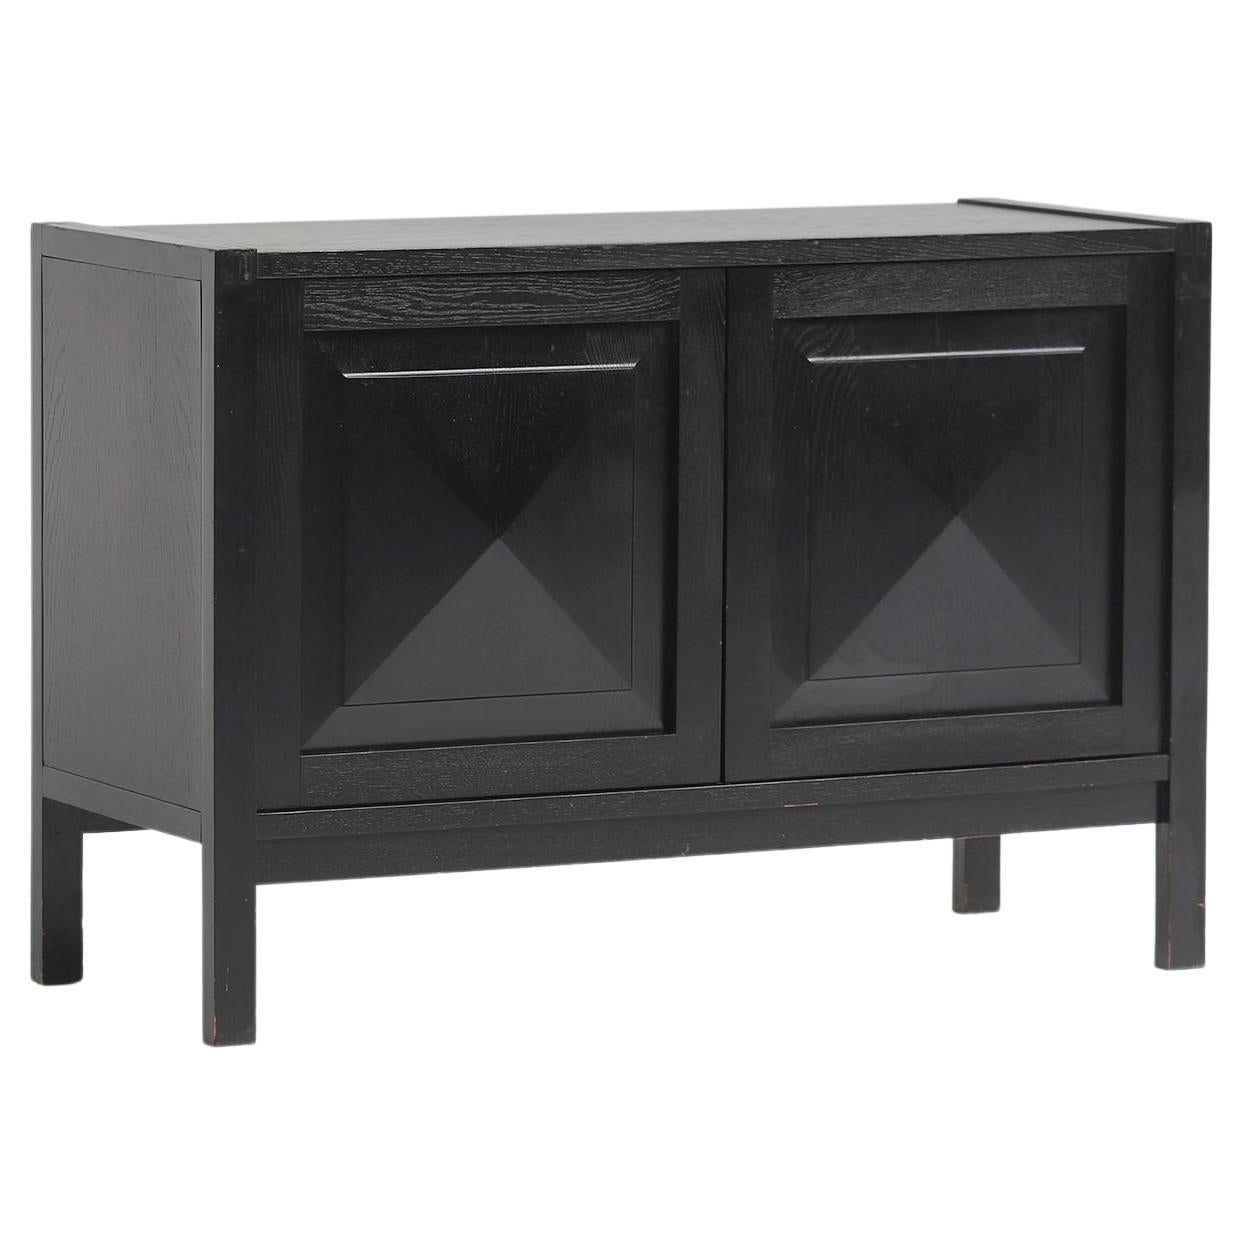 Mid-Century Black Cabinet with Graphic Brutalist Doors by Defour Belgium, 1970s For Sale